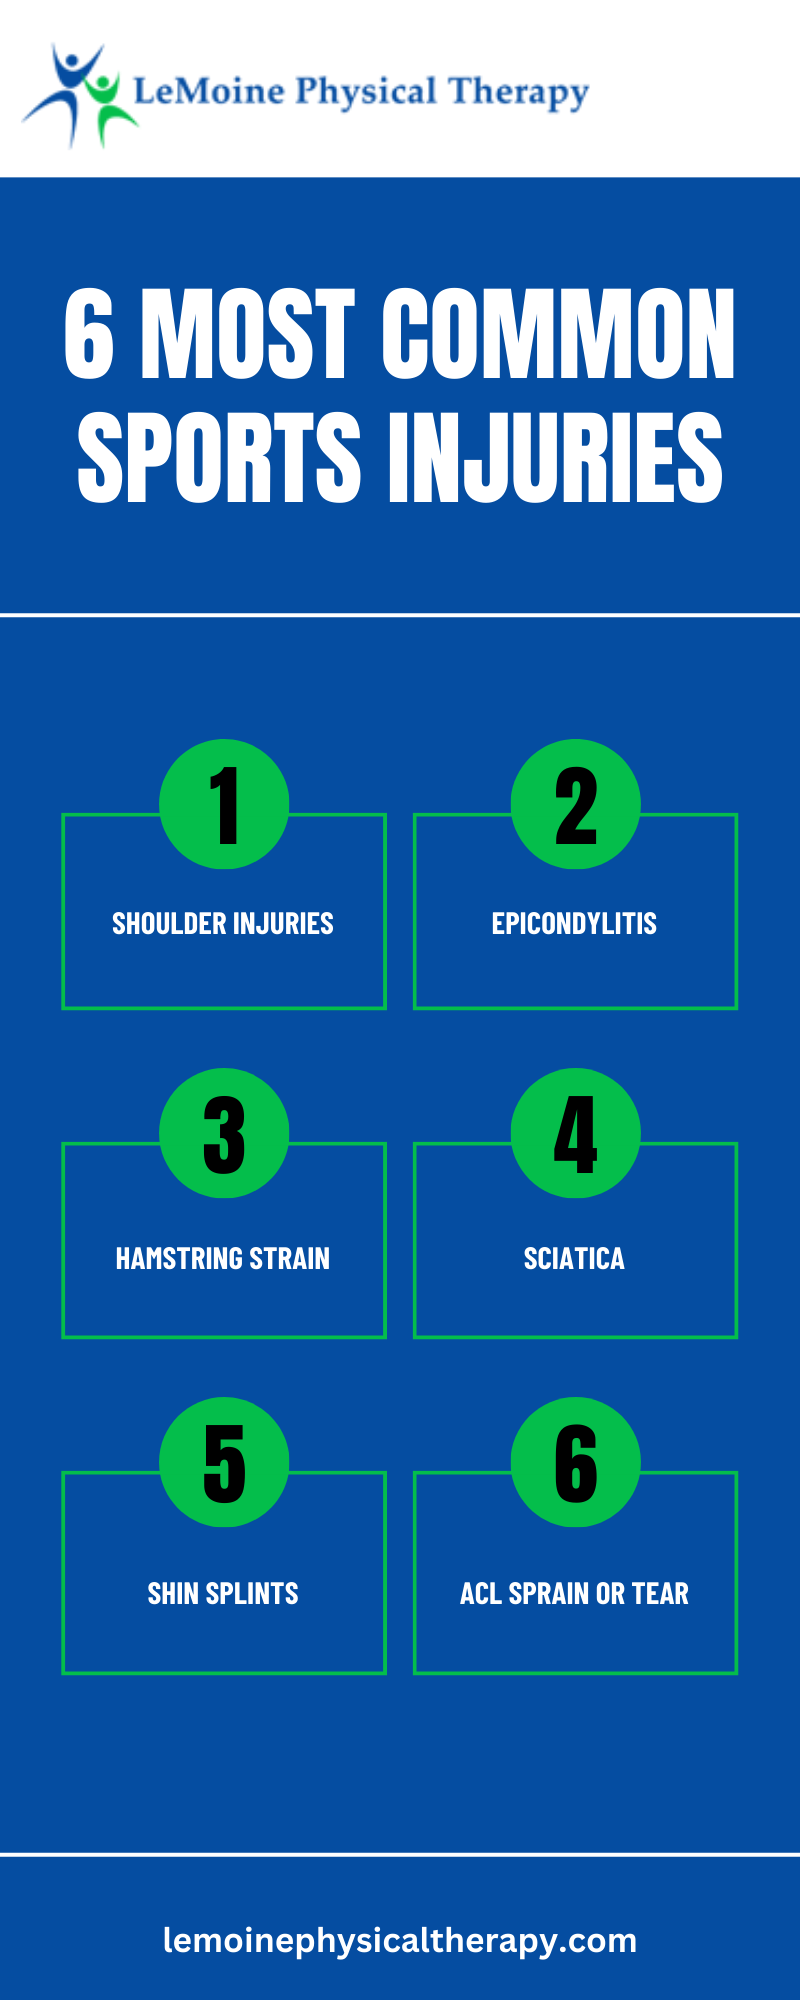 6 Most Common Sports Injuries